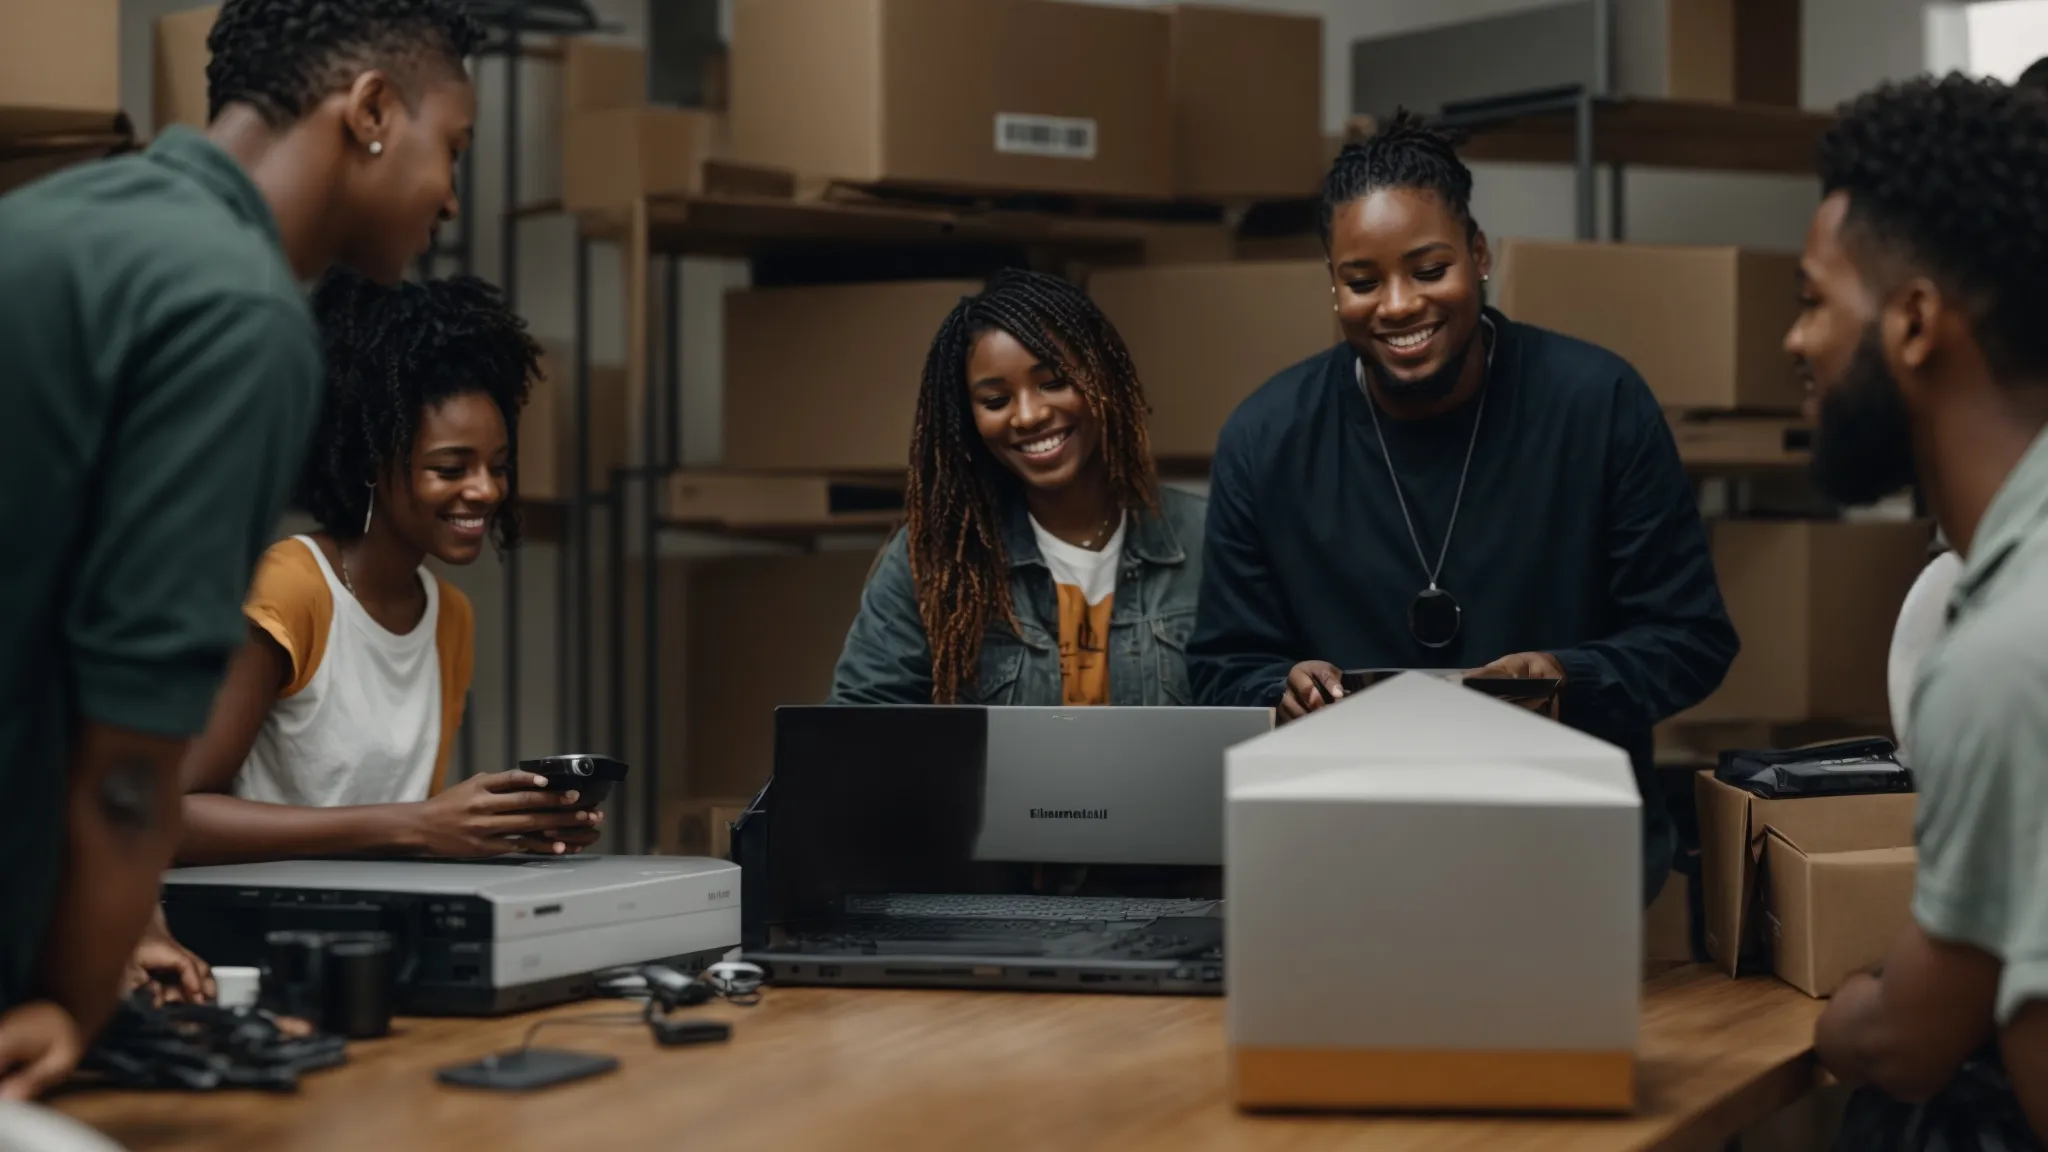 a group of diverse individuals gathers around a table, smiling as they unbox new computers.